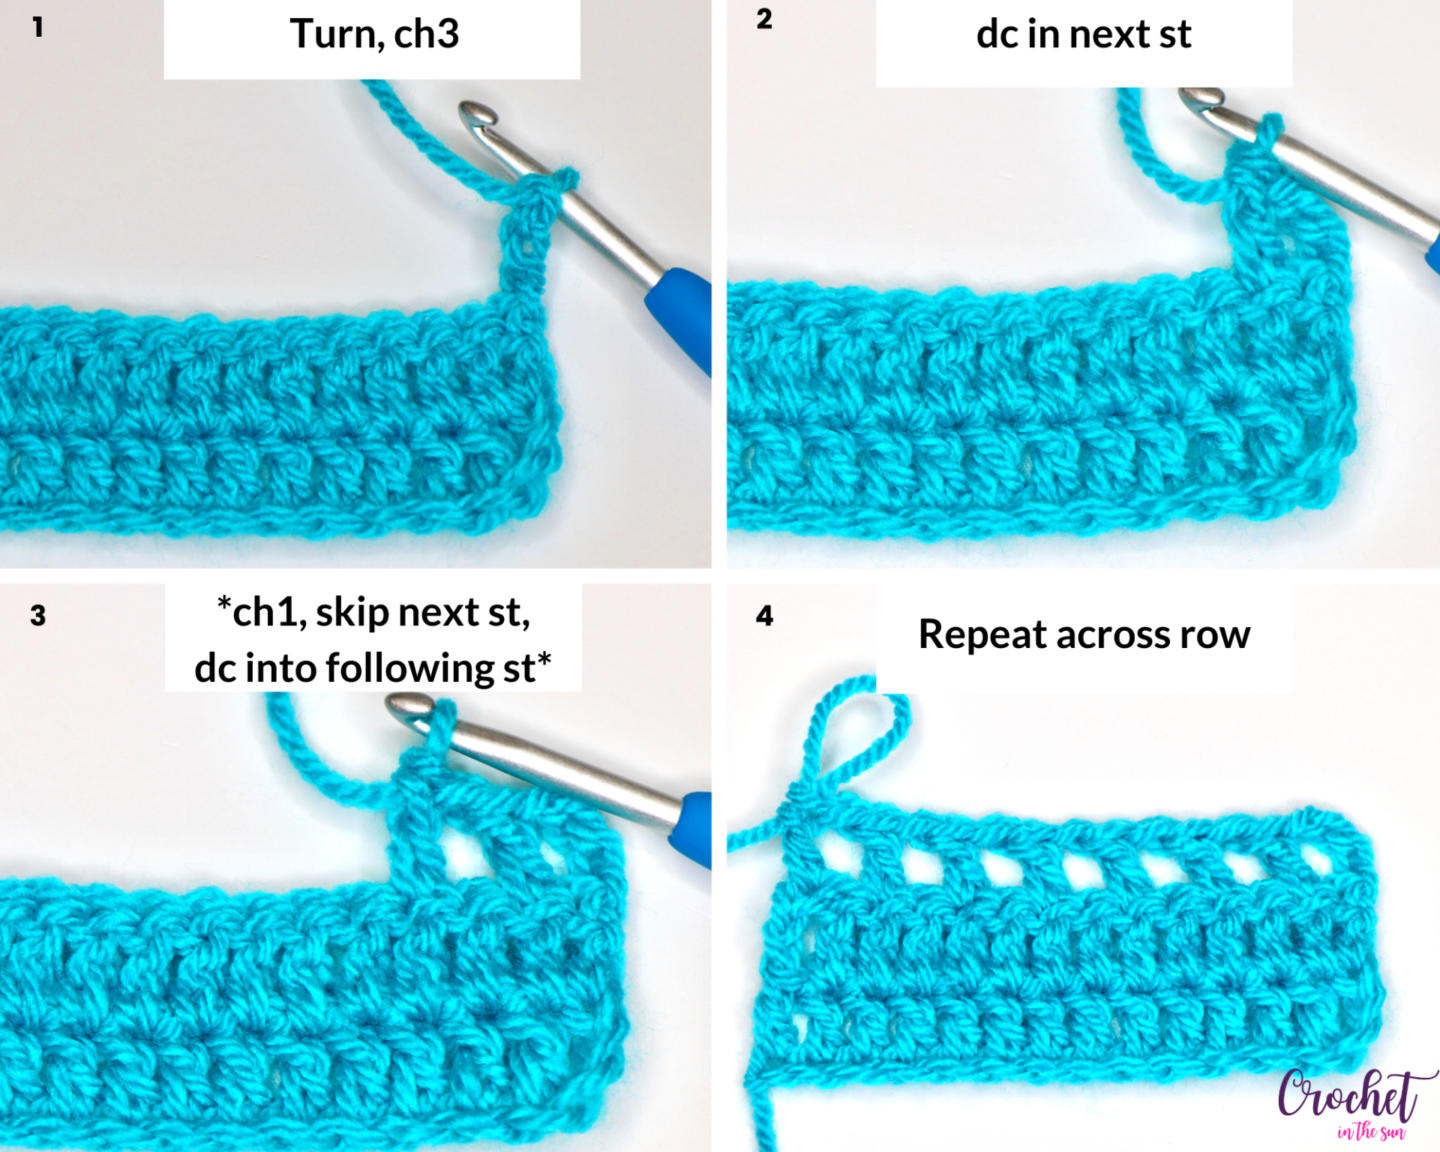 FREE and easy crochet project. This features my 'Open Windows' stitch which is an easy stitch repeat, and works up to be so beautiful! This is the progress after Row 4. Beginner friendly and free crochet pattern!